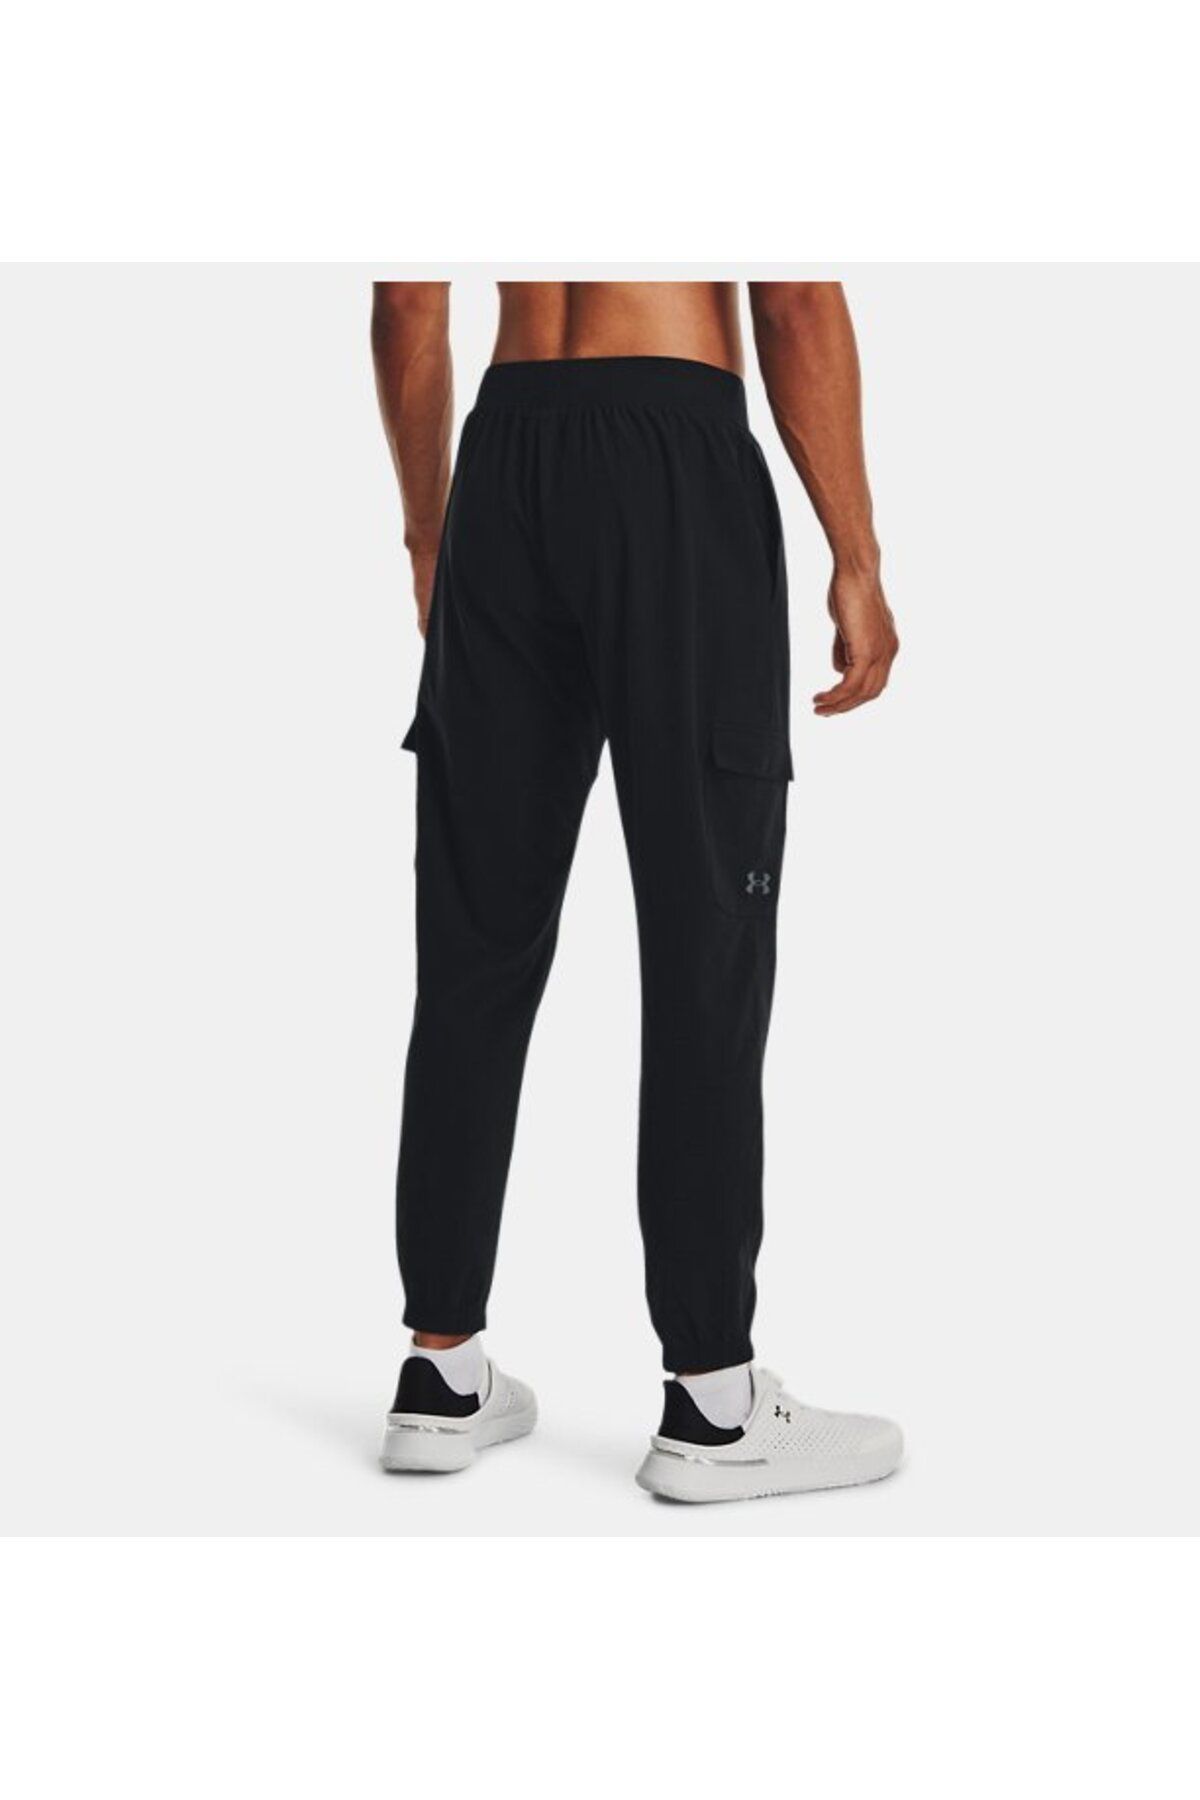 Under Armour Stretch Woven training pants for men – Soccer Sport